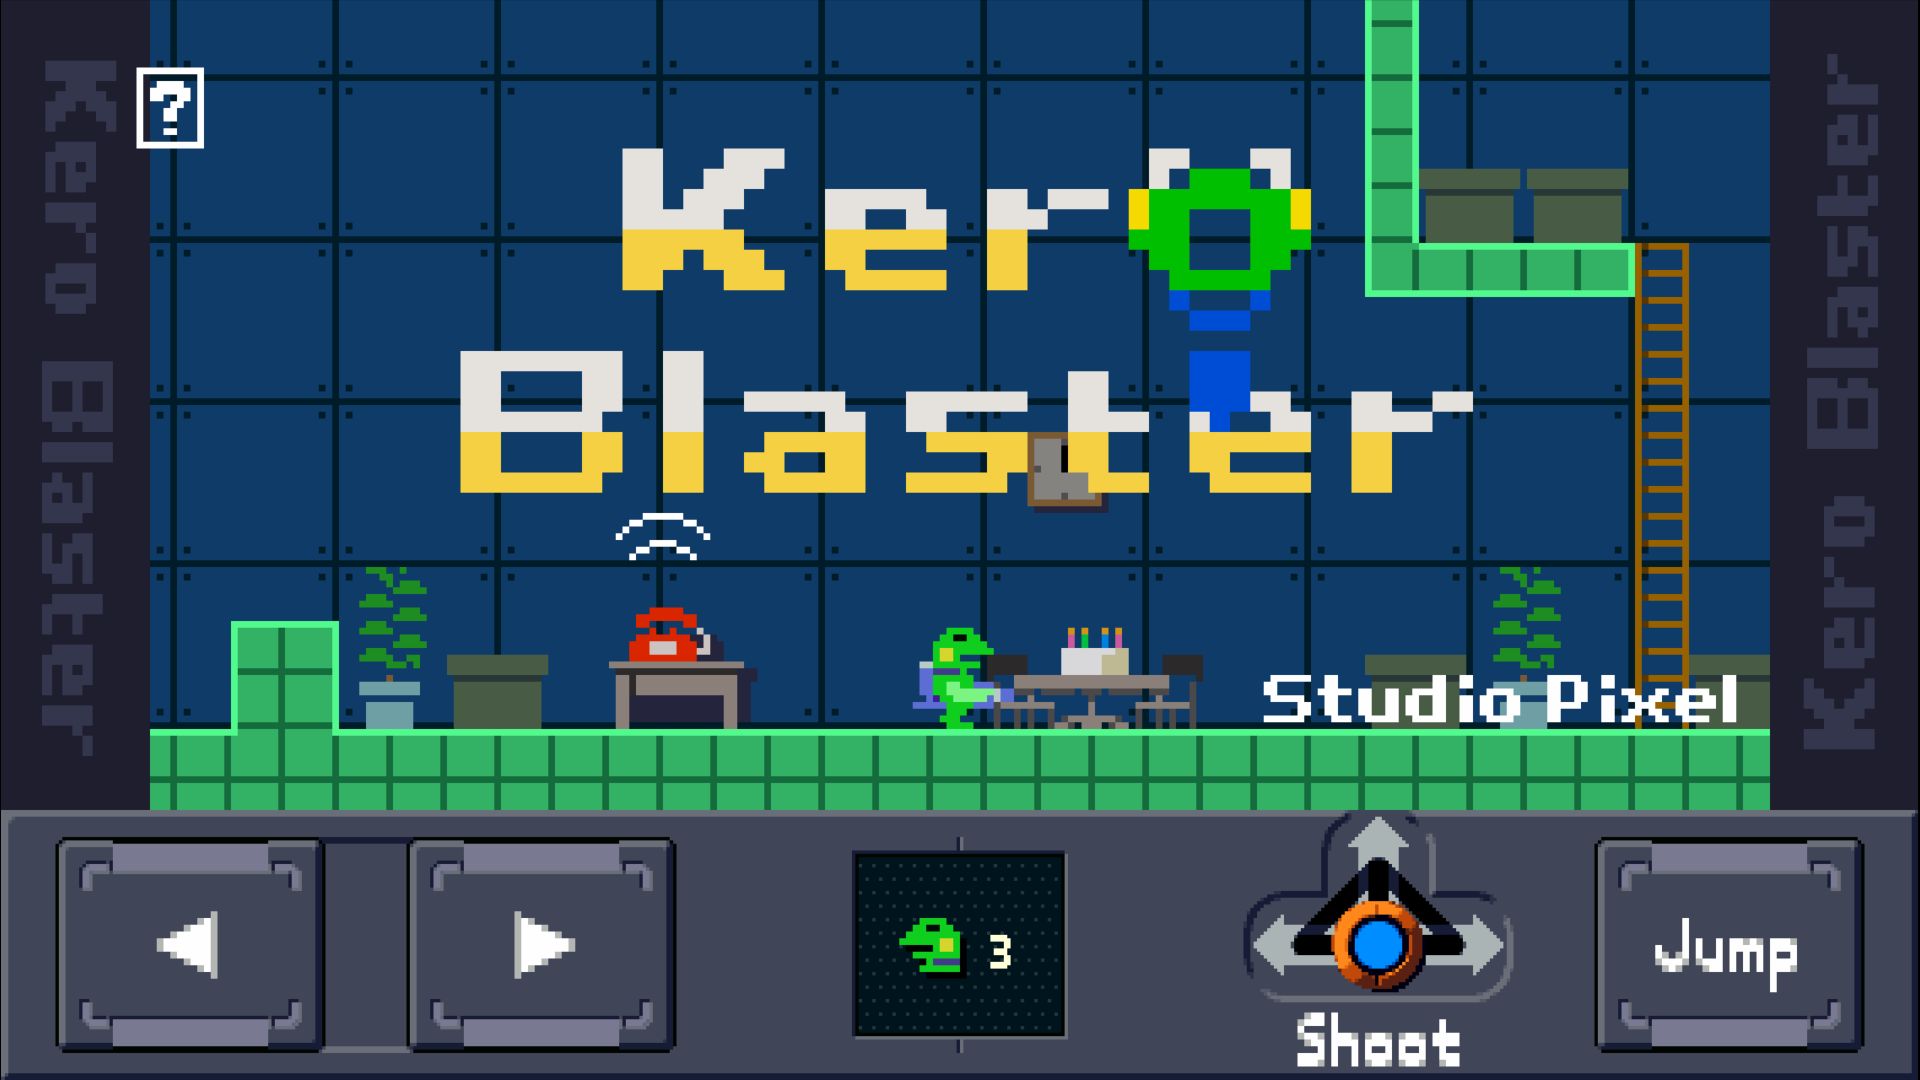 Kero Blaster for Android